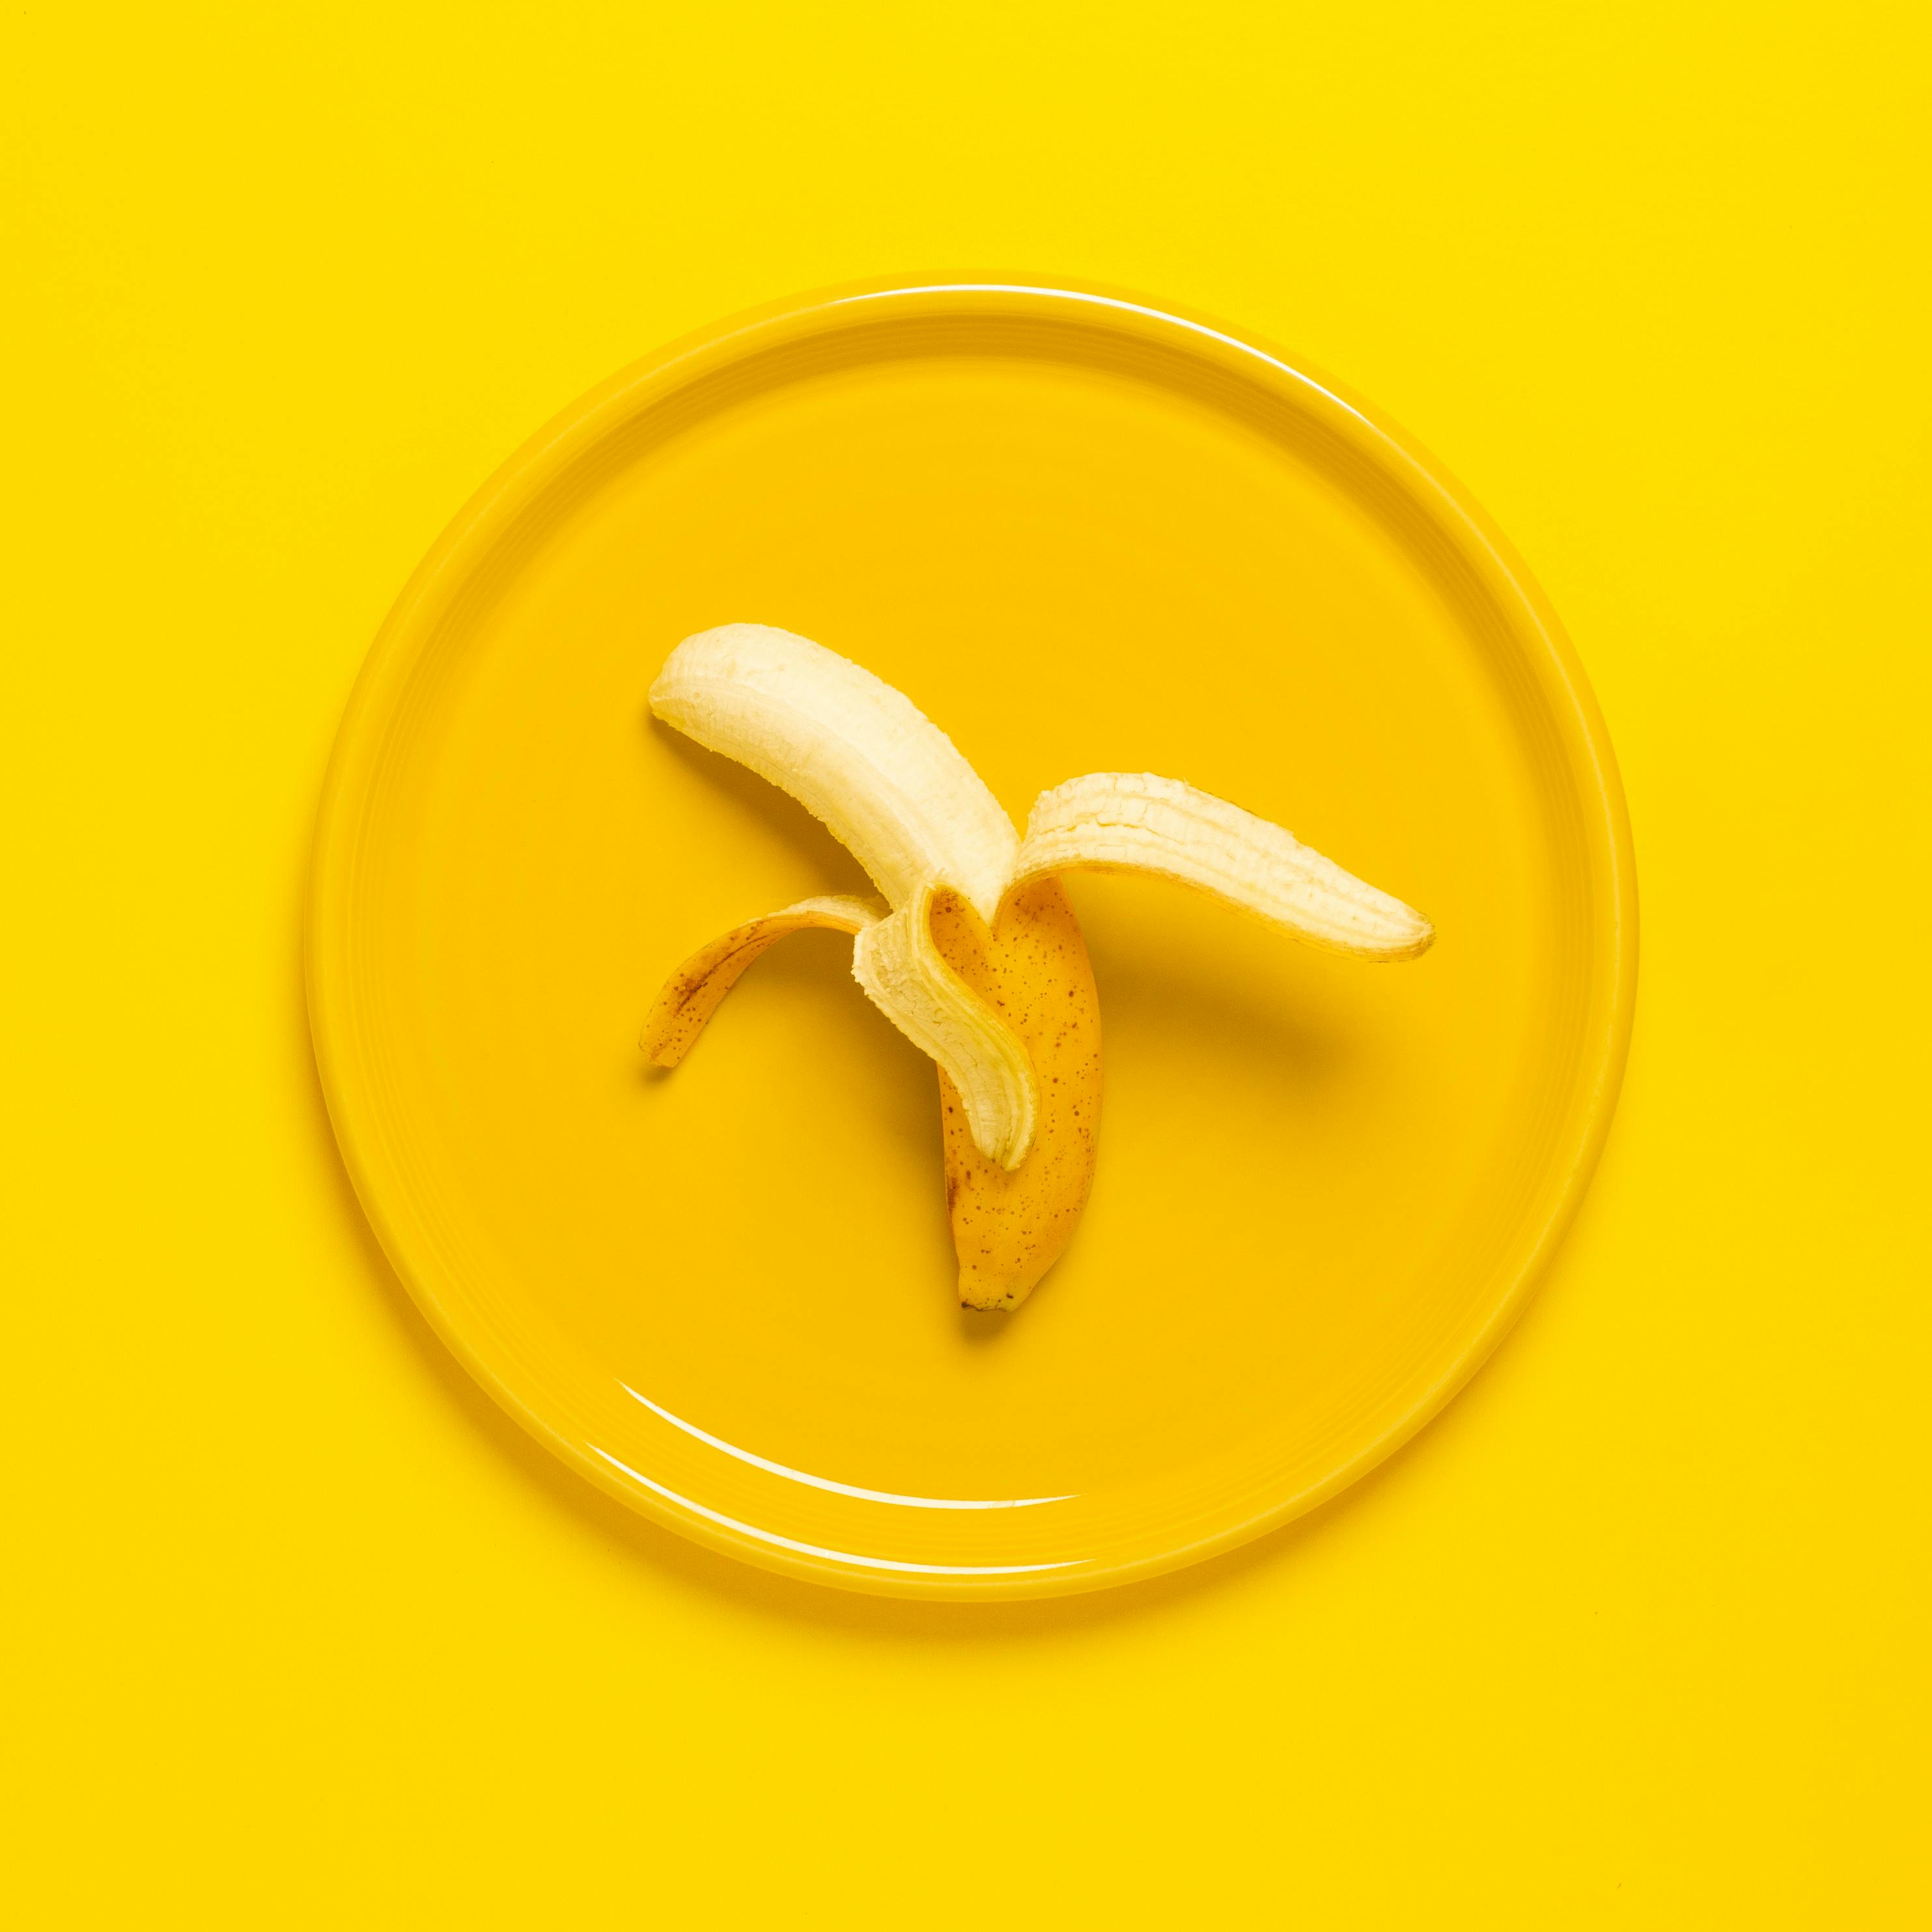 Photo of Peeled Banana on Yellow Plate and Background · Free Stock Photo